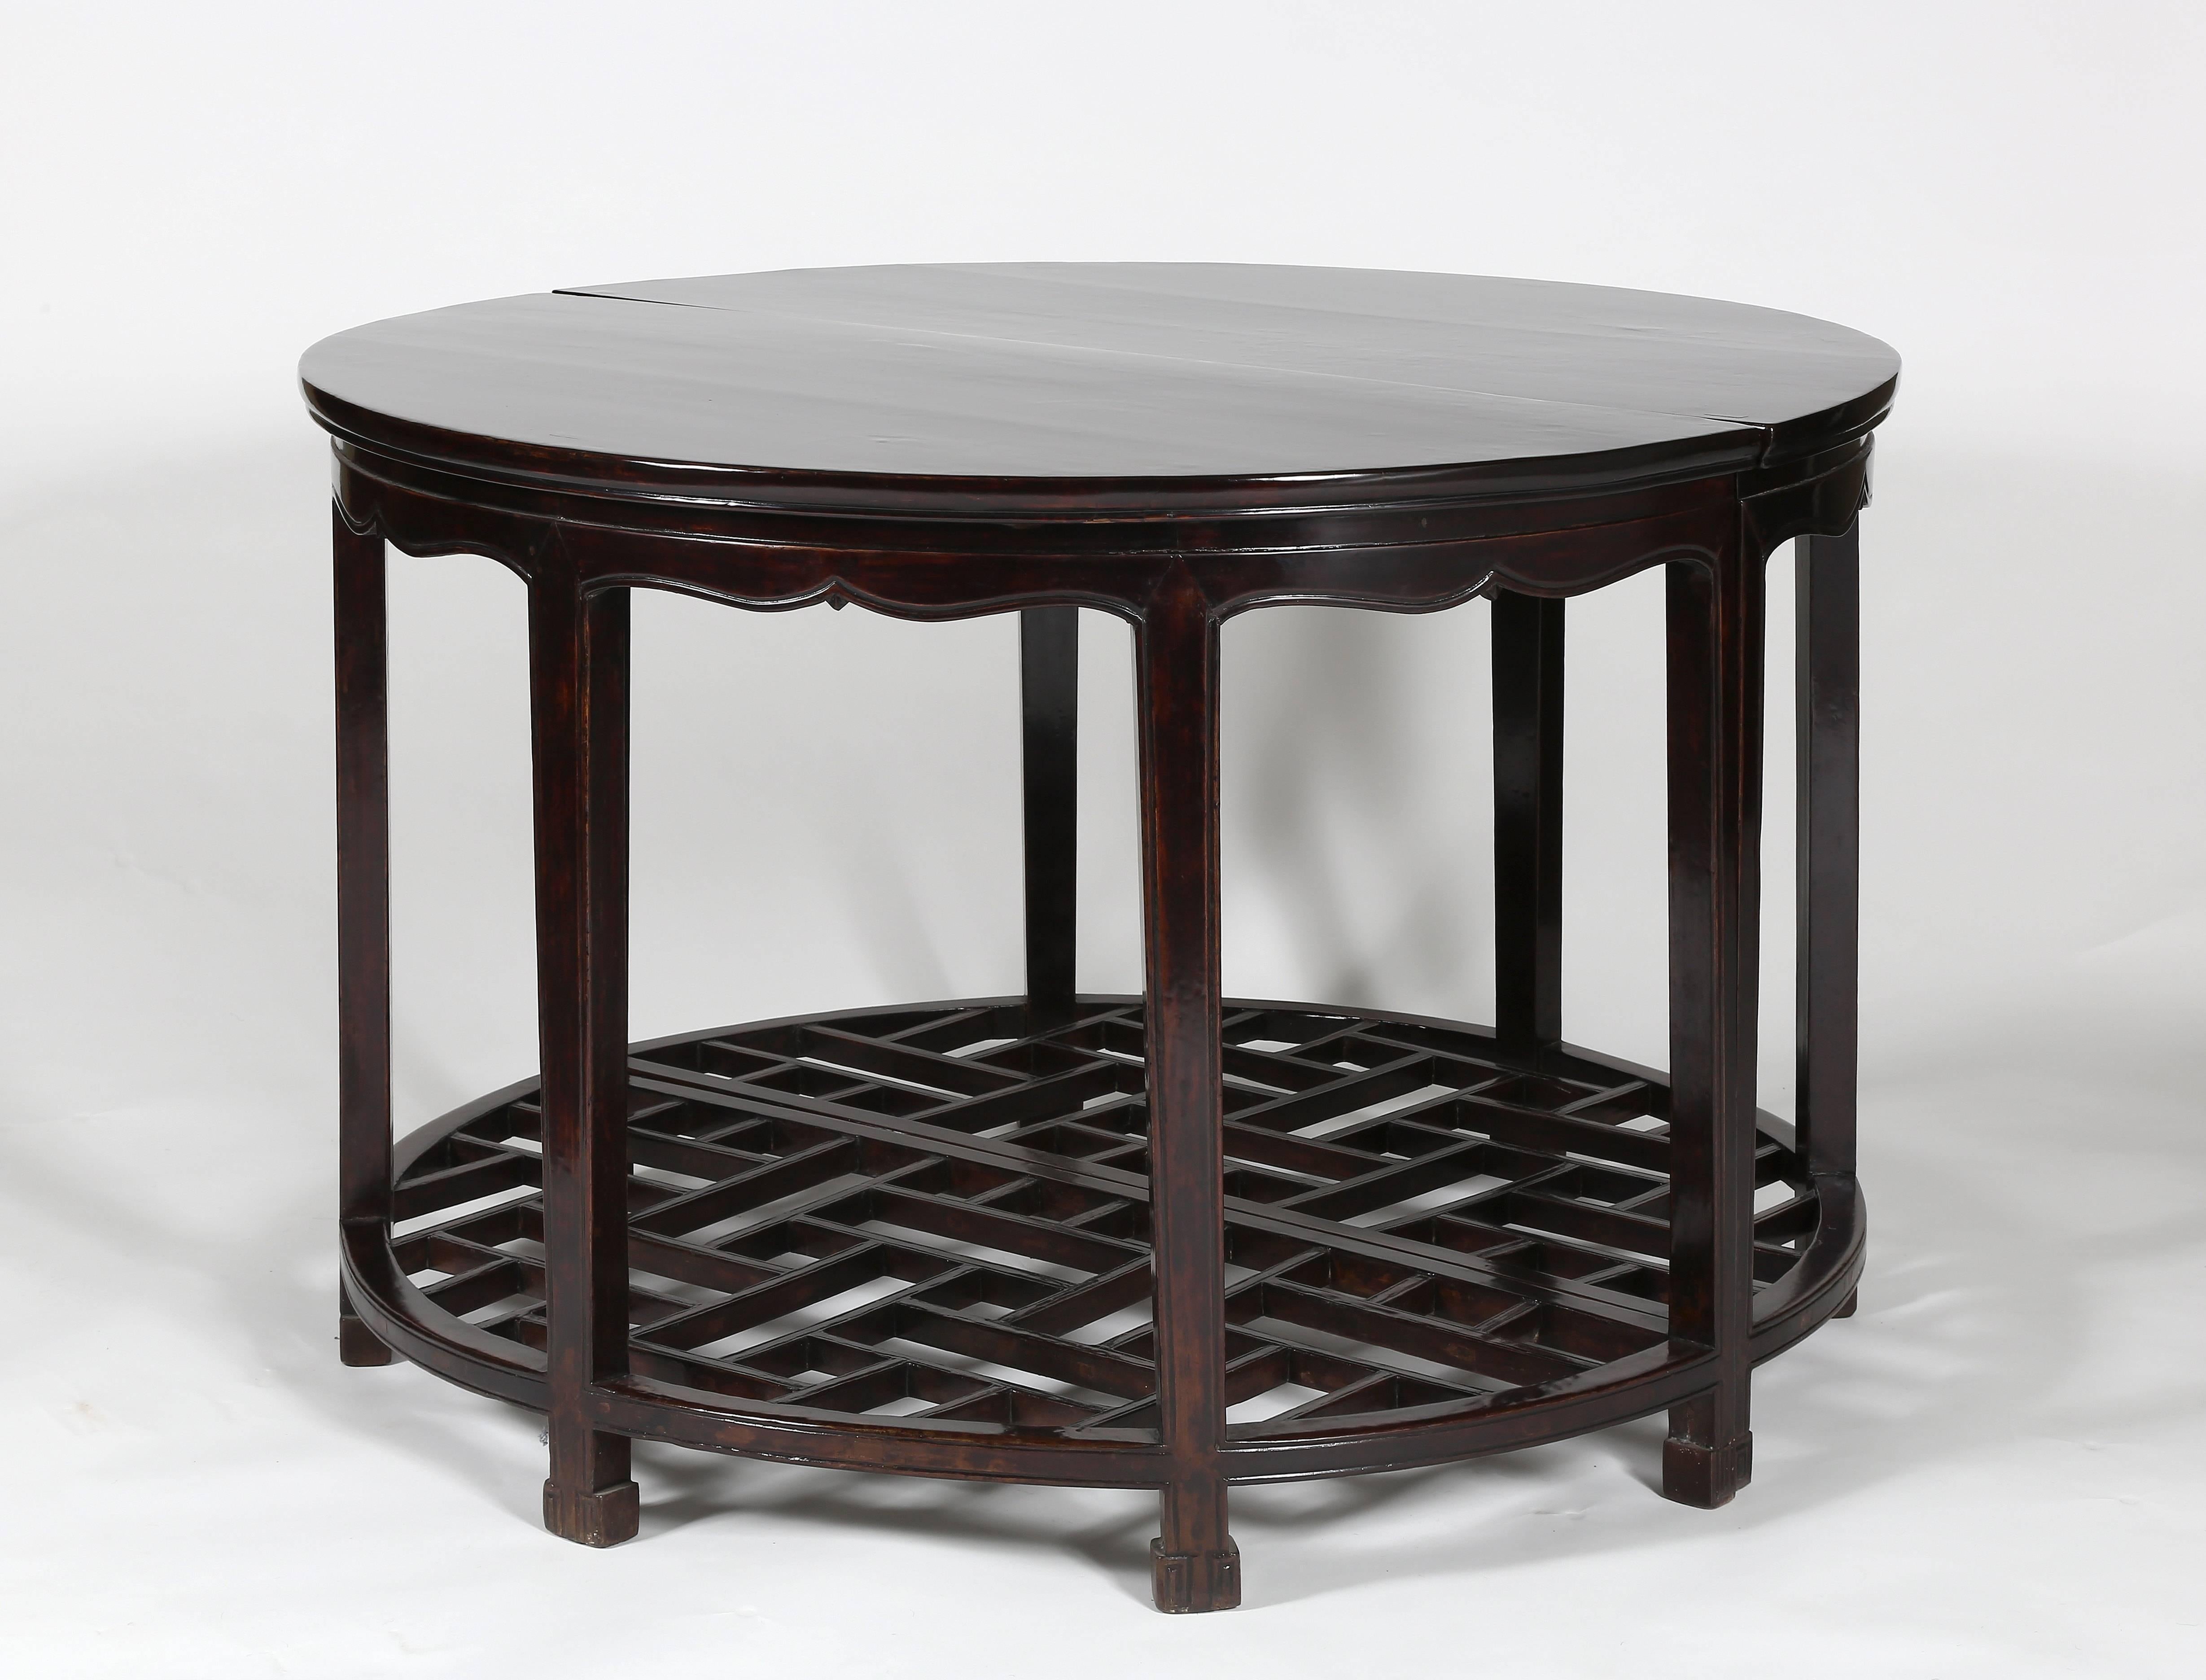 The Fine pair of half-moon tables covered in rich dark lacquer, with solid wood top above a waist, supported on rectangular-sectioned legs decorated with cusped curvilinear aprons, carved with a beading along the edges, the legs braced with a